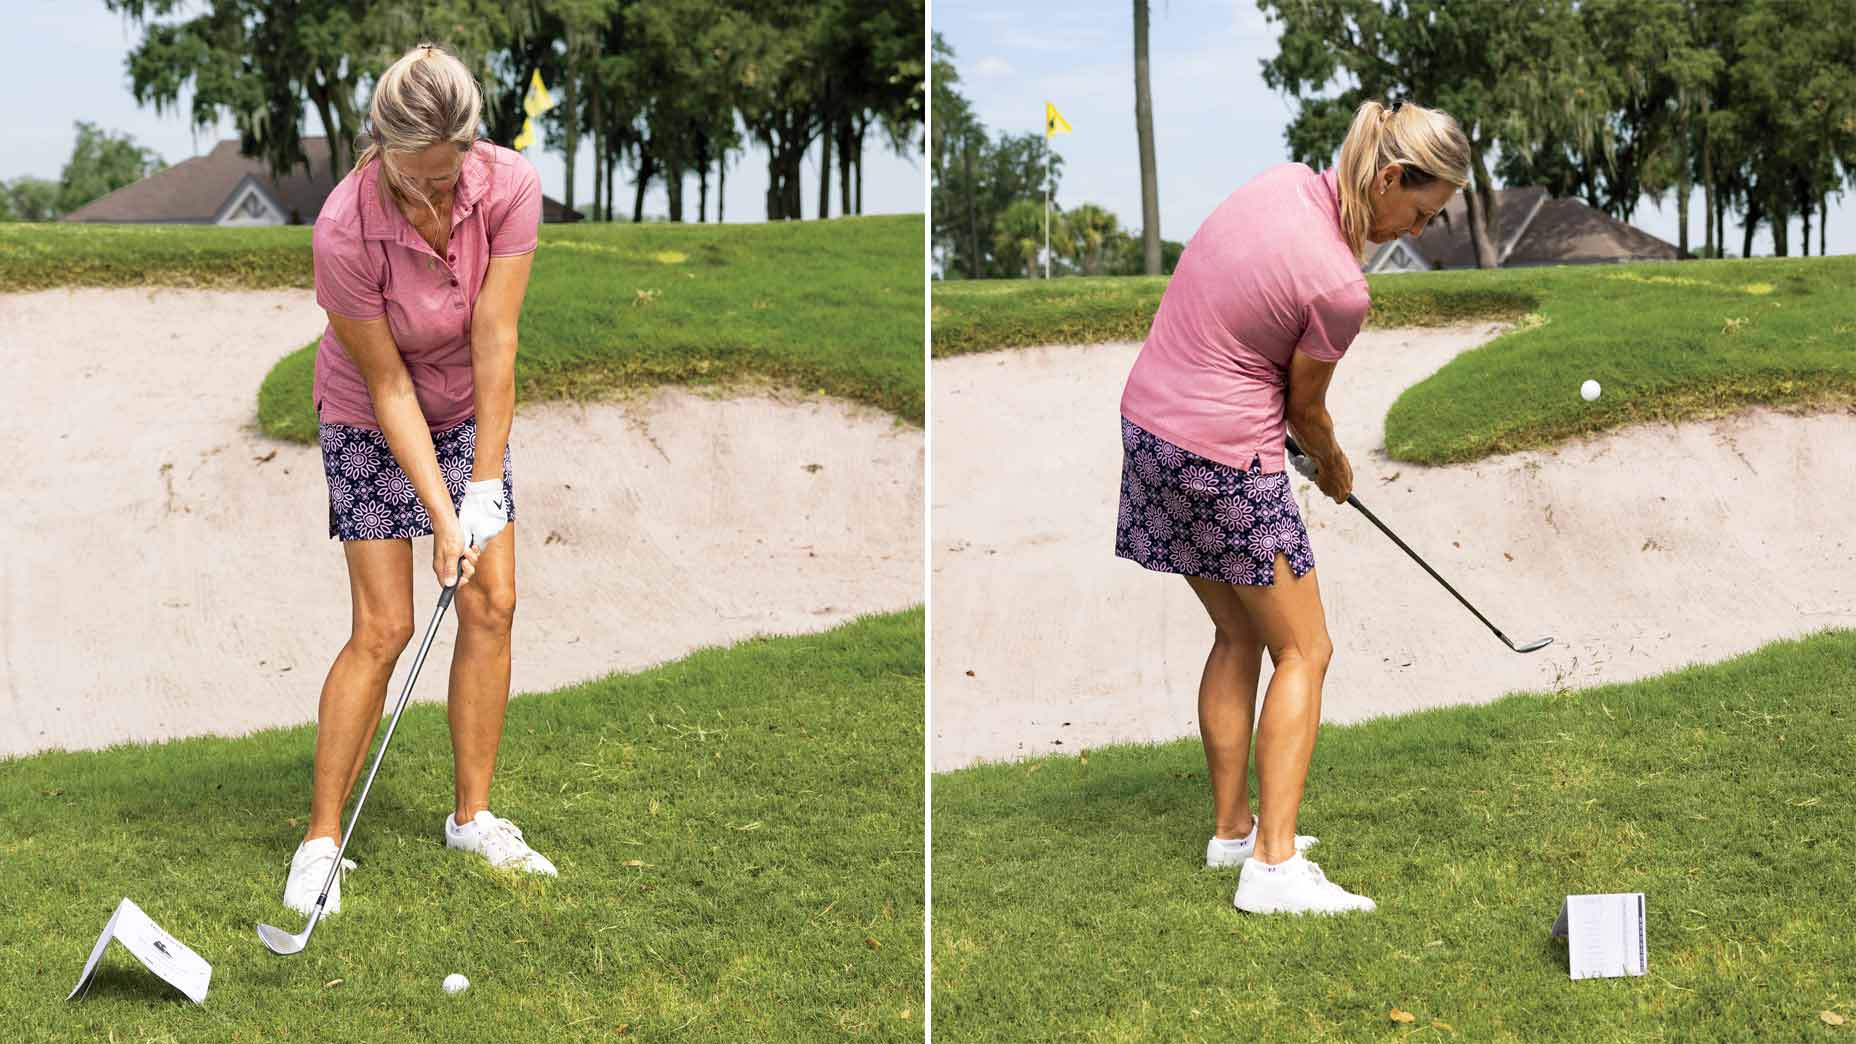 carol preisinger demonstrates how to hinge your wrists and hit shot over a bunker